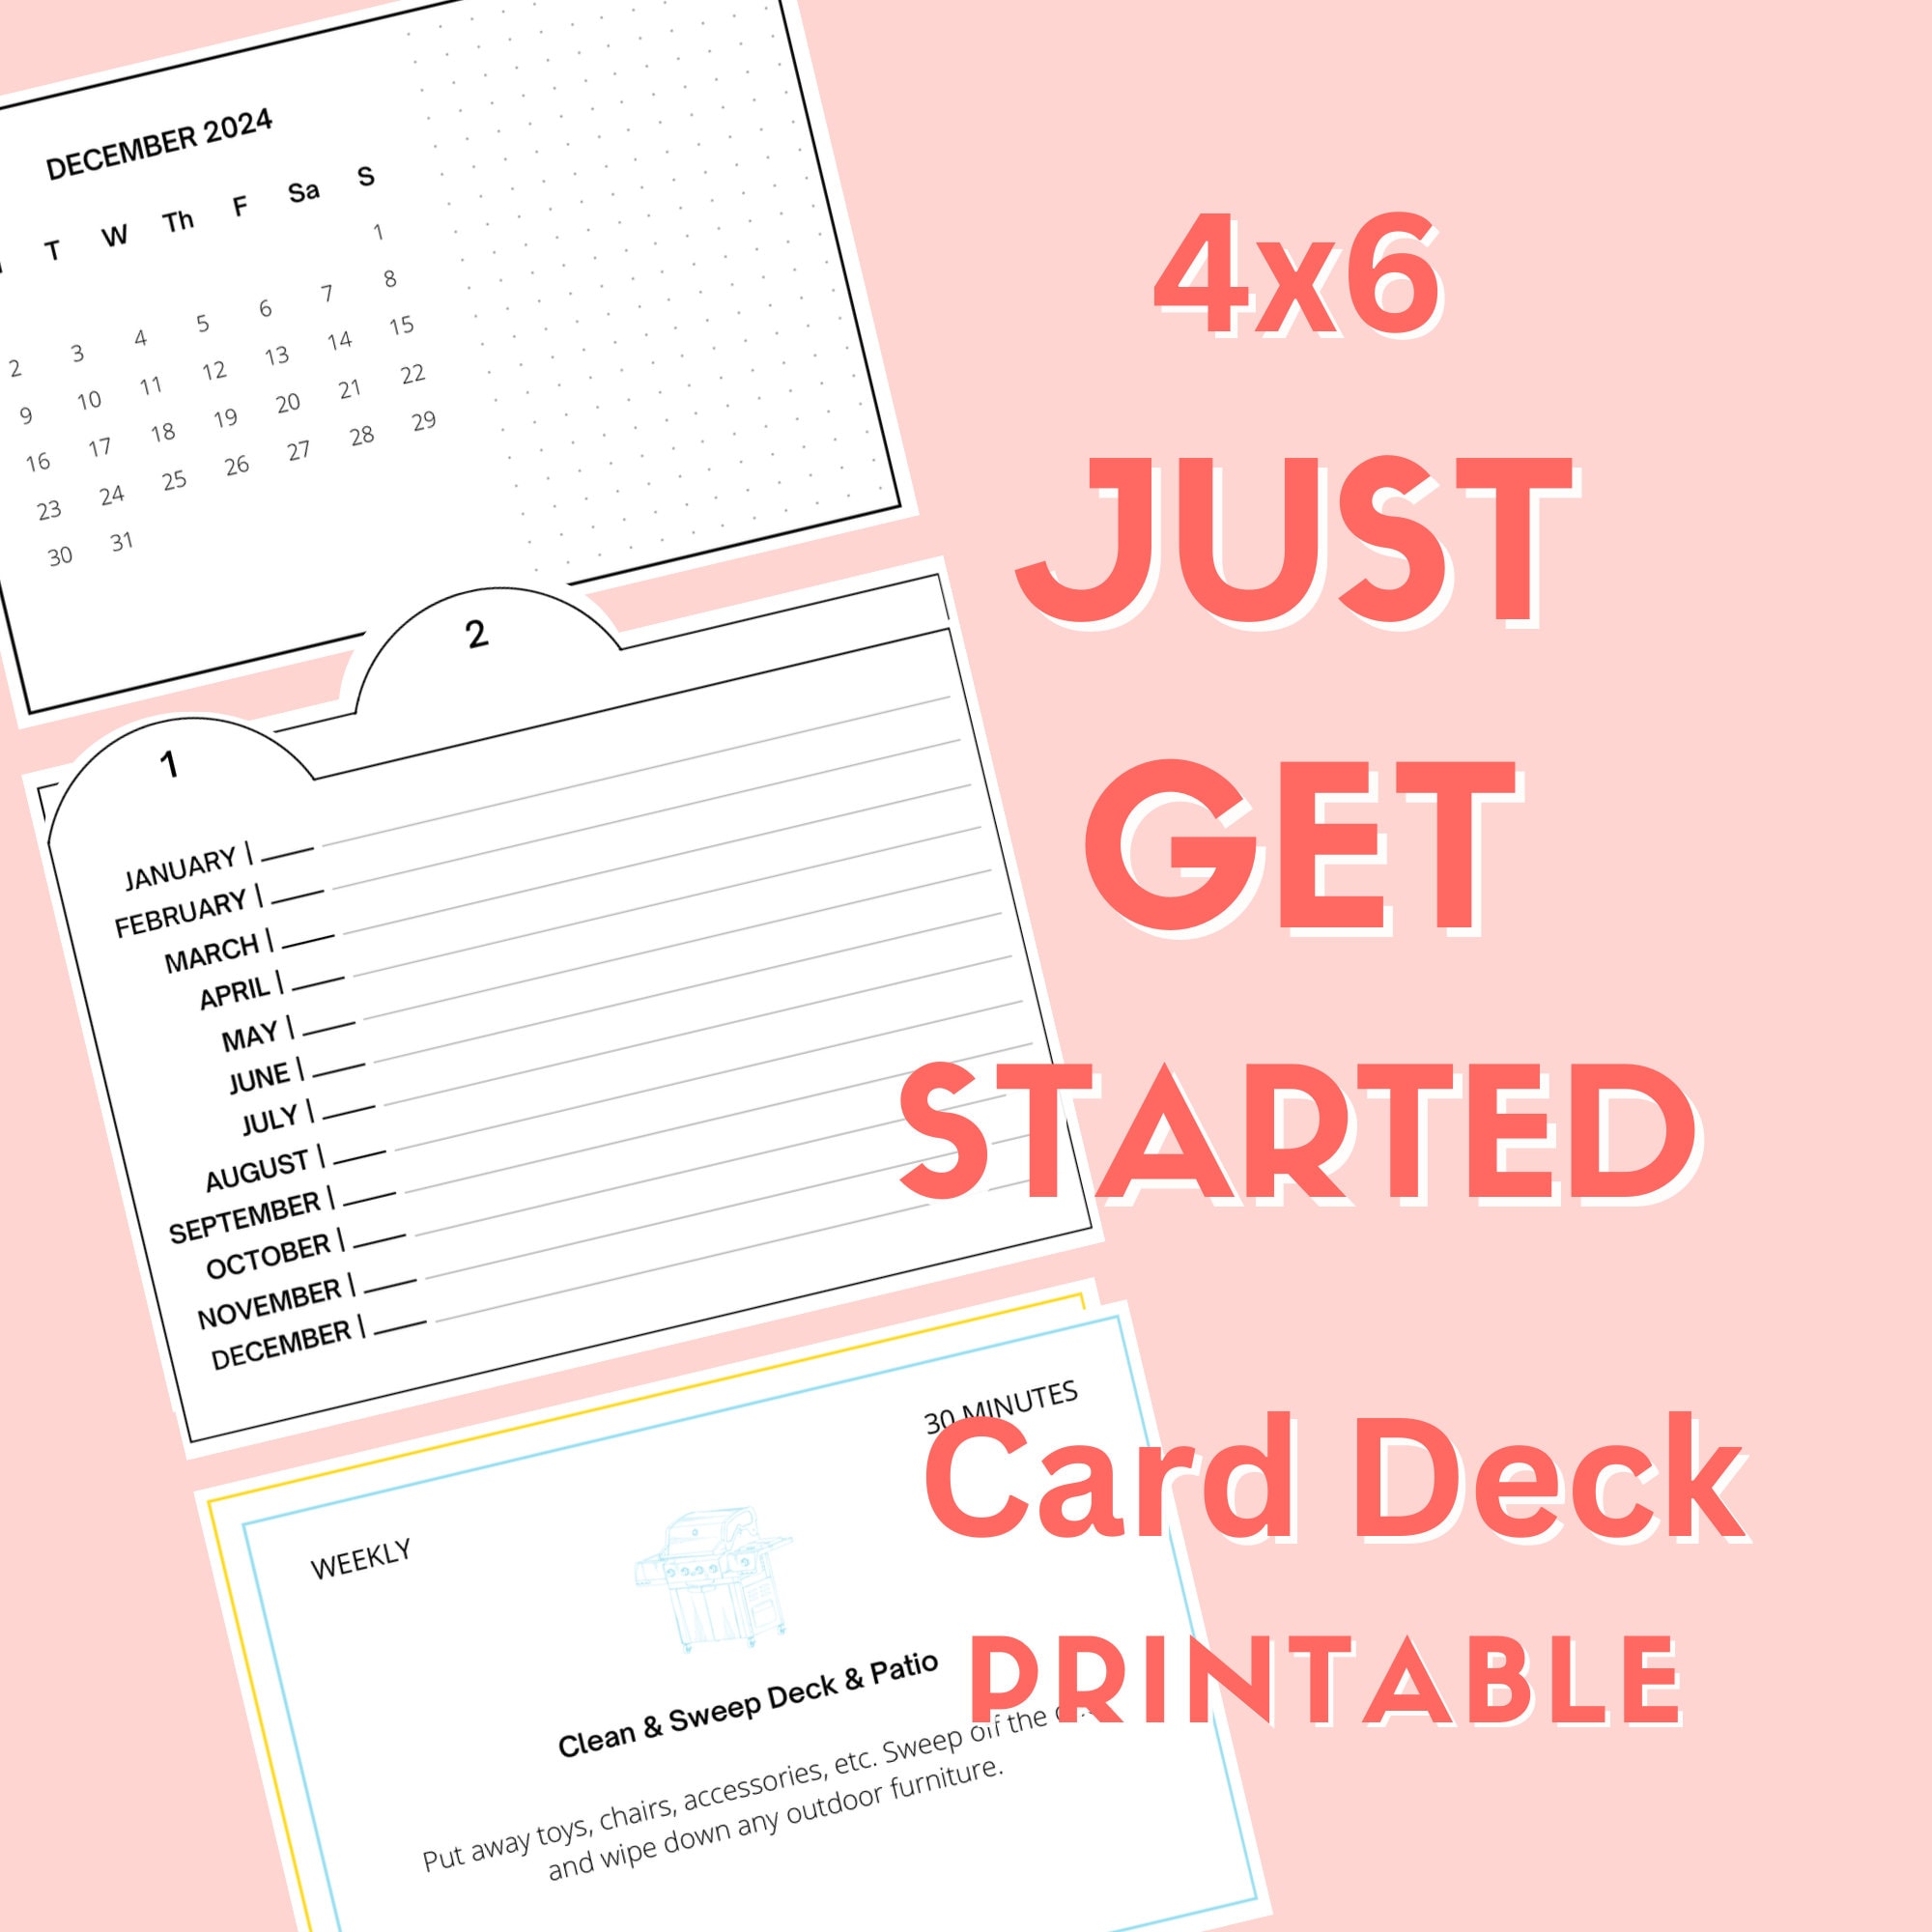 Printable 4x6 Index Card. Printable Note Cards. Printable Index Cards. Blank  Index Cards. Index Card PDF. Index Card Template. 